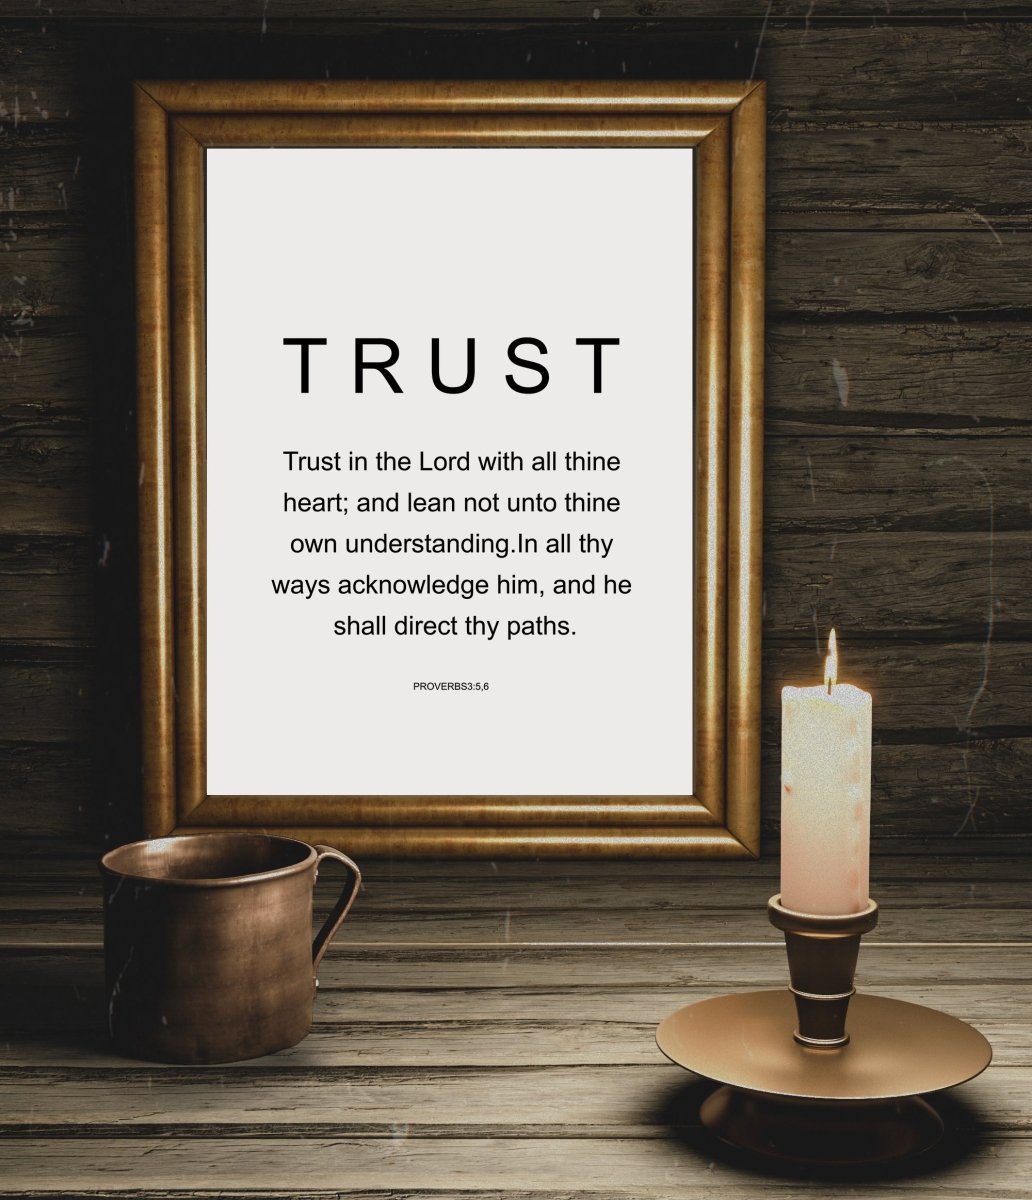 Trust in the Lord, Proverbs 3:5 - AmourPrints